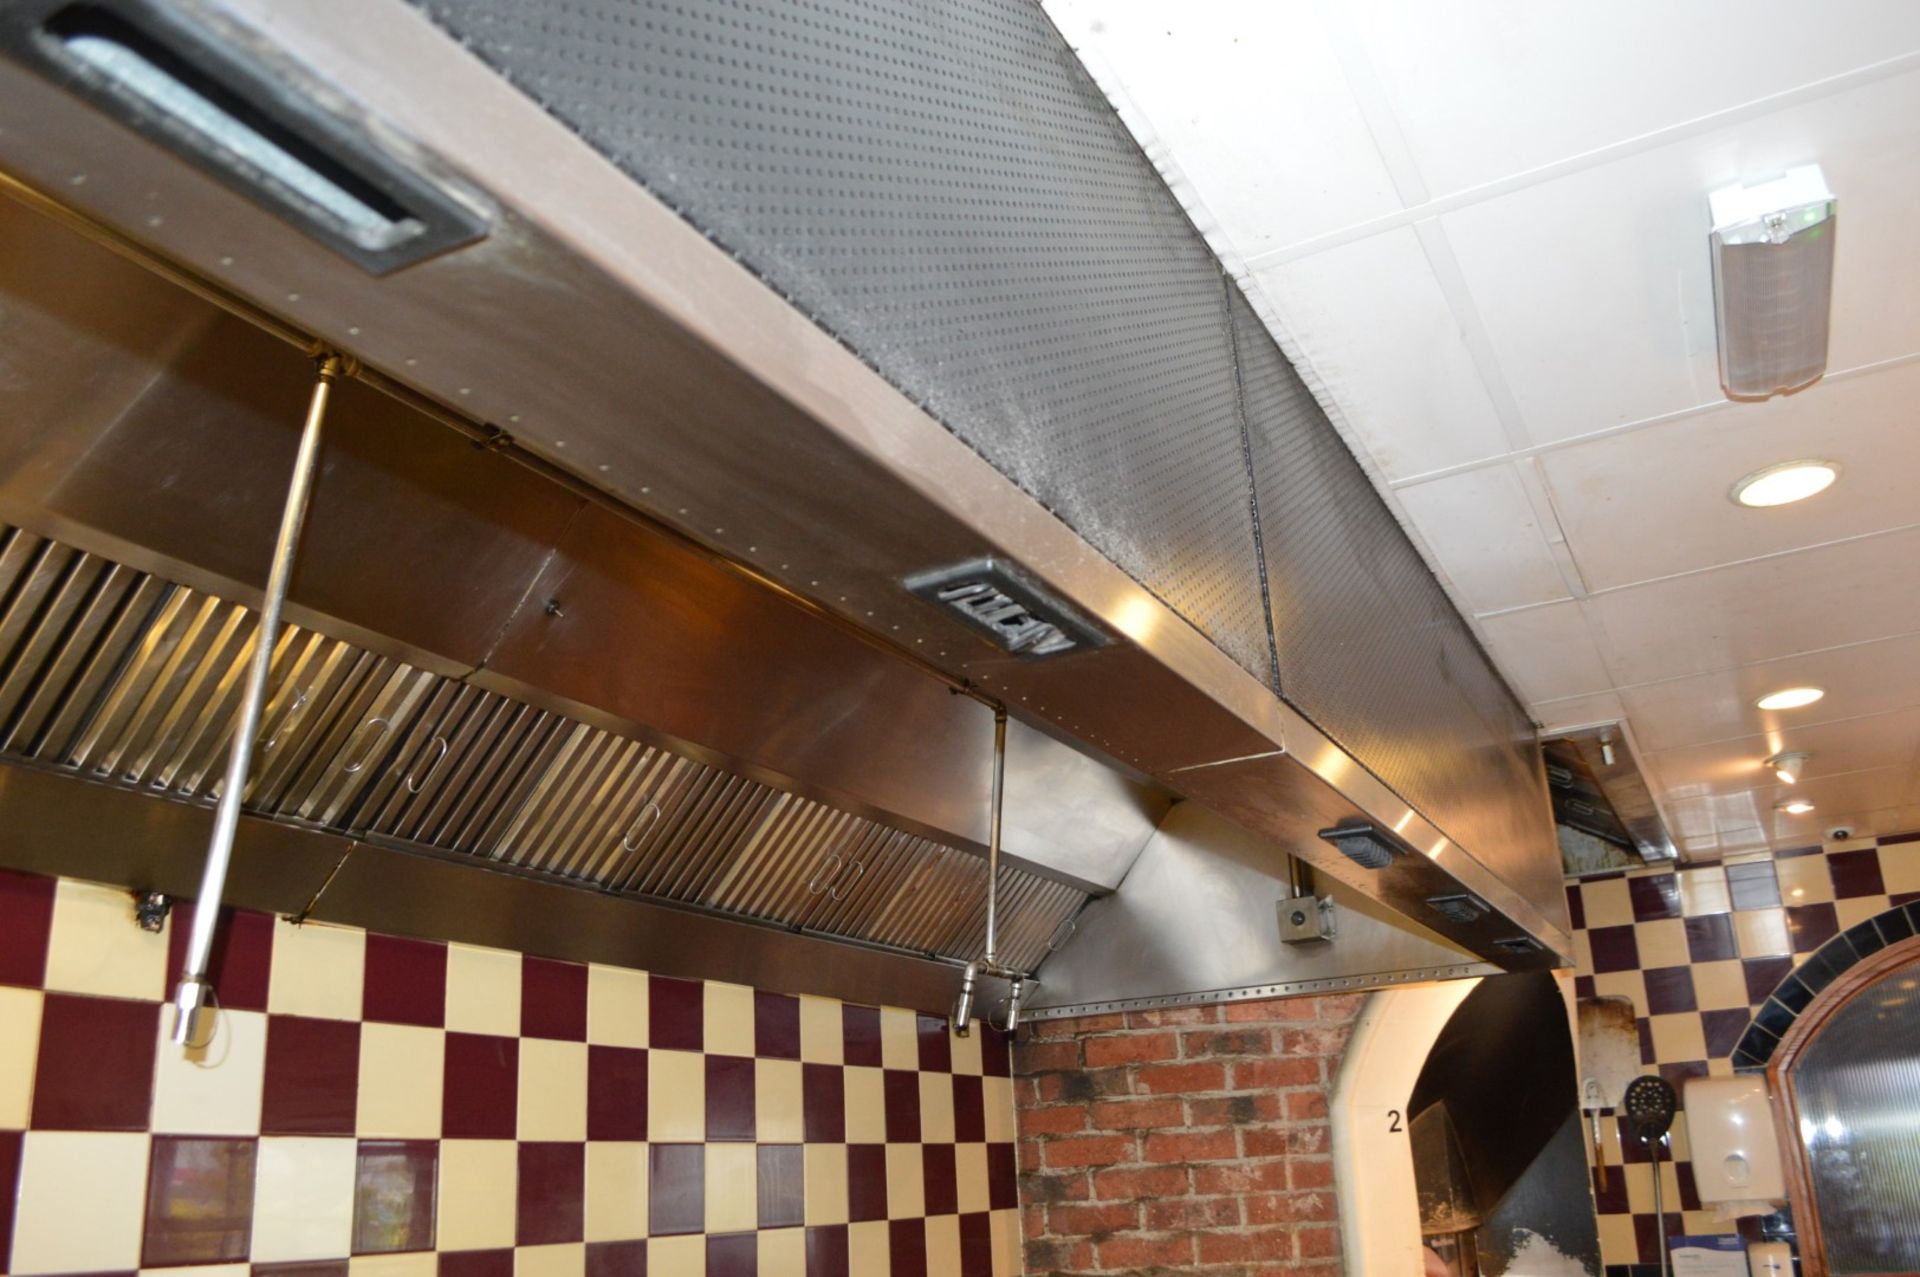 1 x Commercial Stainless Steel Kitchen Extractor Canopy With Ansul R-102 Fire Suppression System - - Image 2 of 13